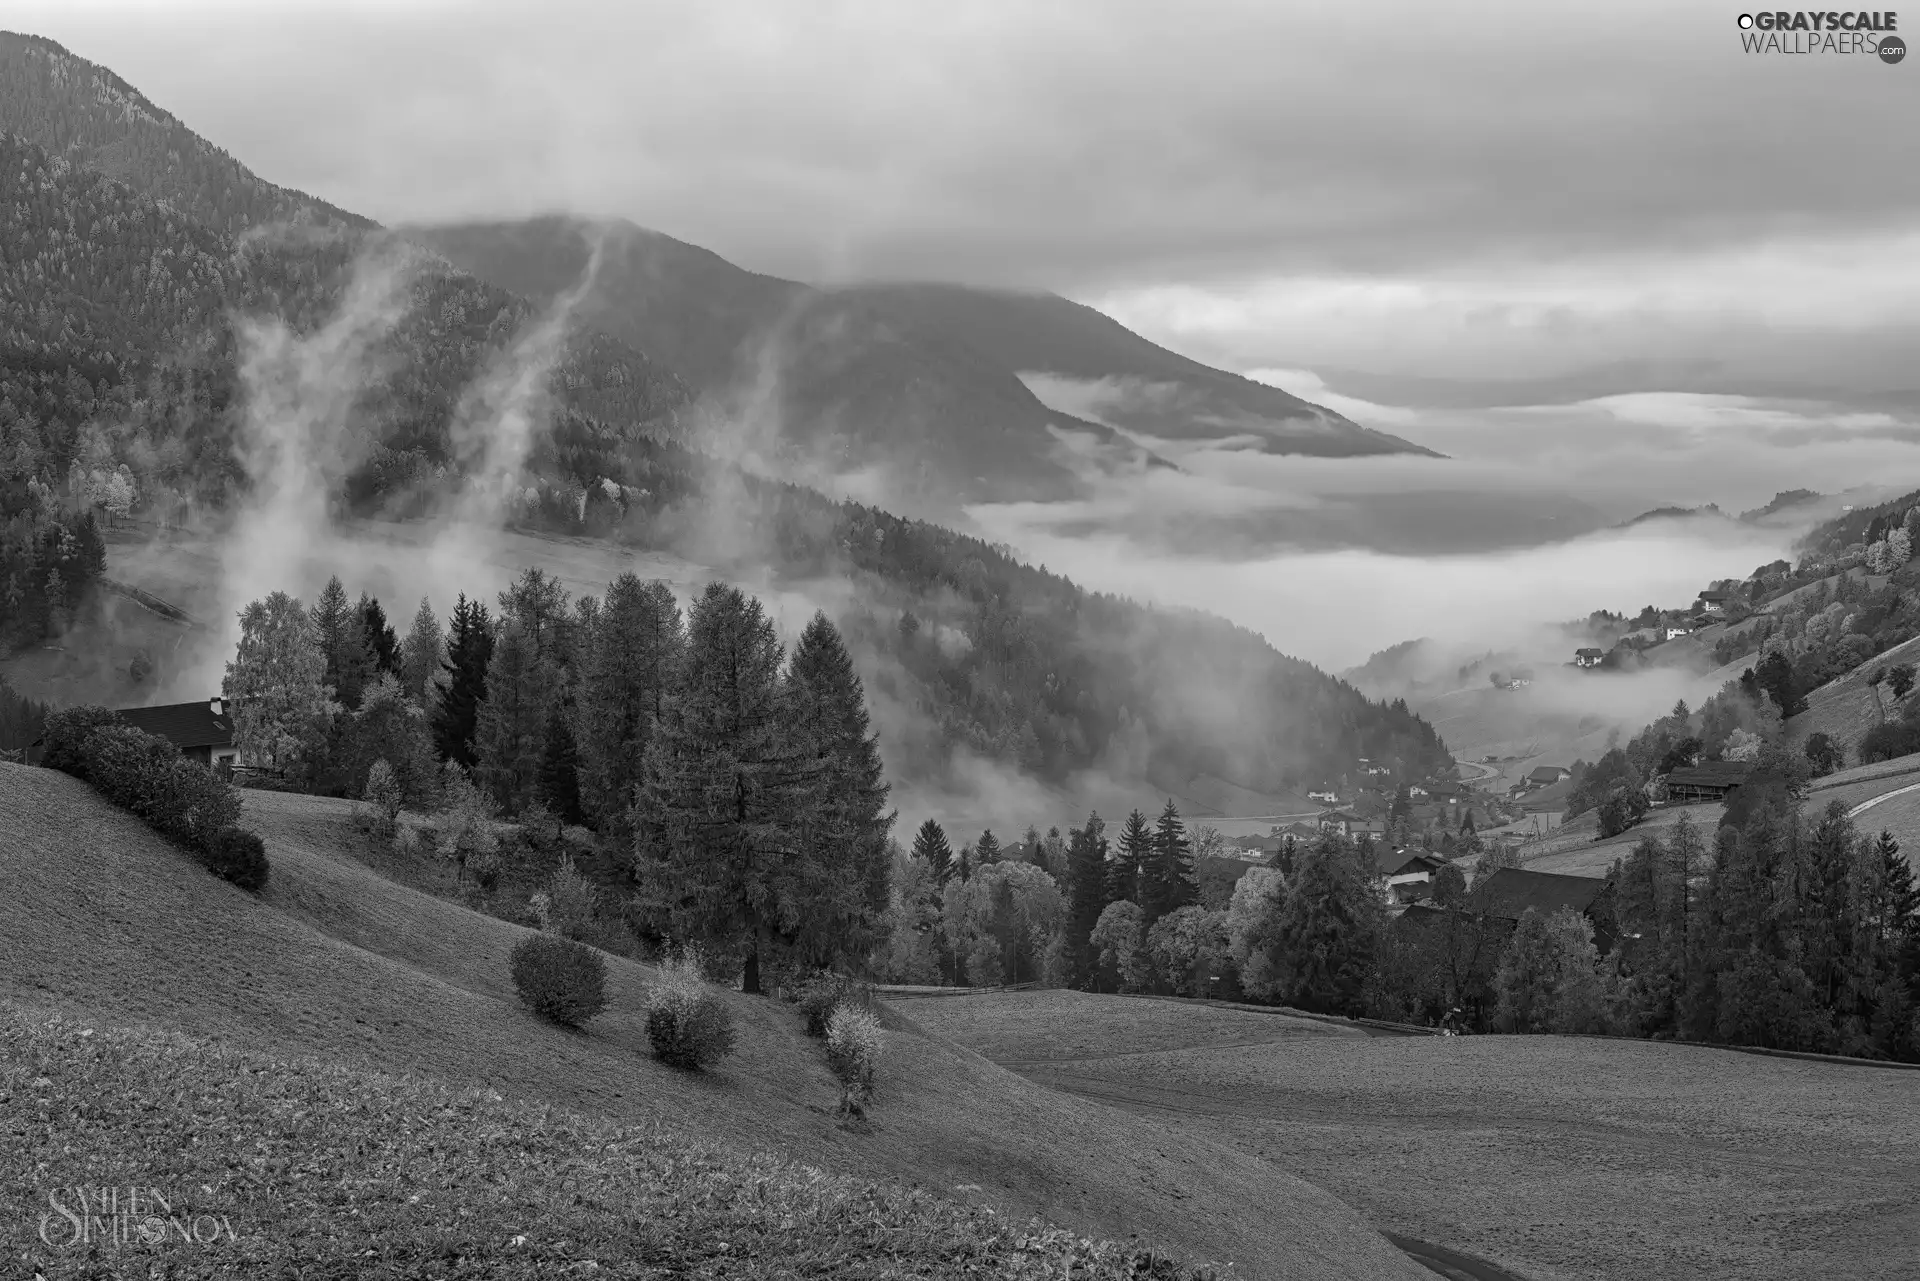 viewes, country, Mountains, Houses, Dolomites, Italy, Santa Maddalena, Fog, The Hills, trees